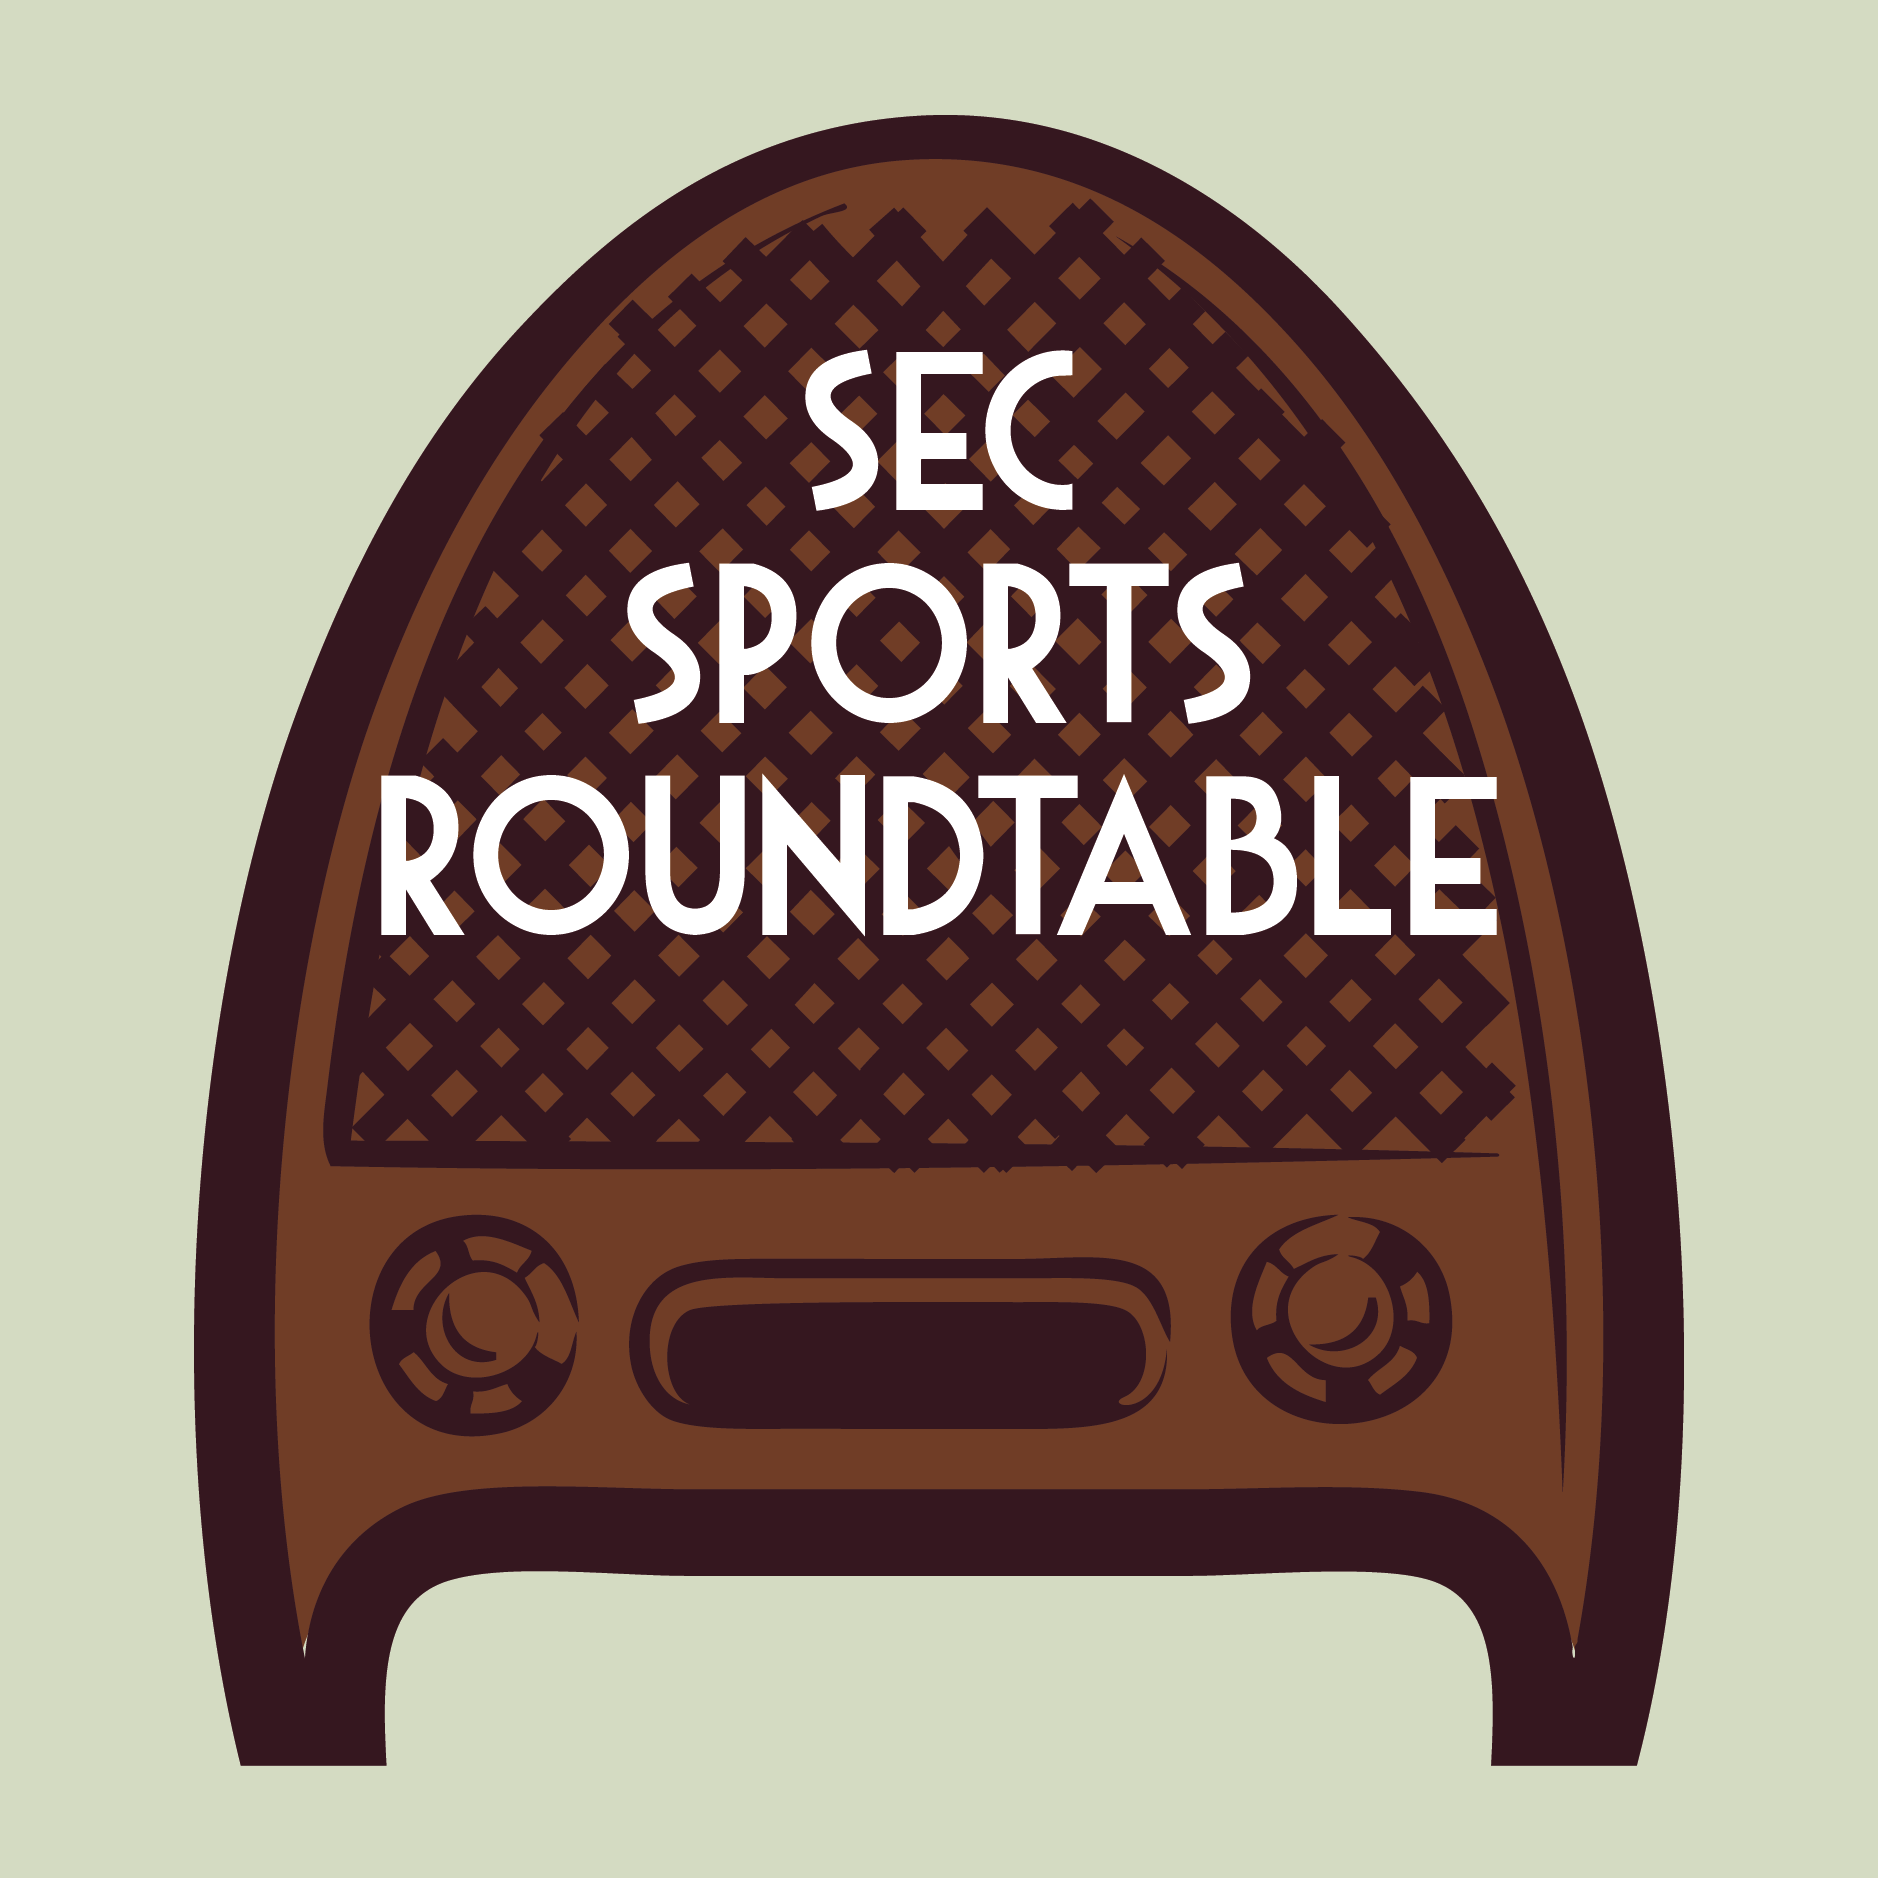 SEC Sports Roundtable Podcast